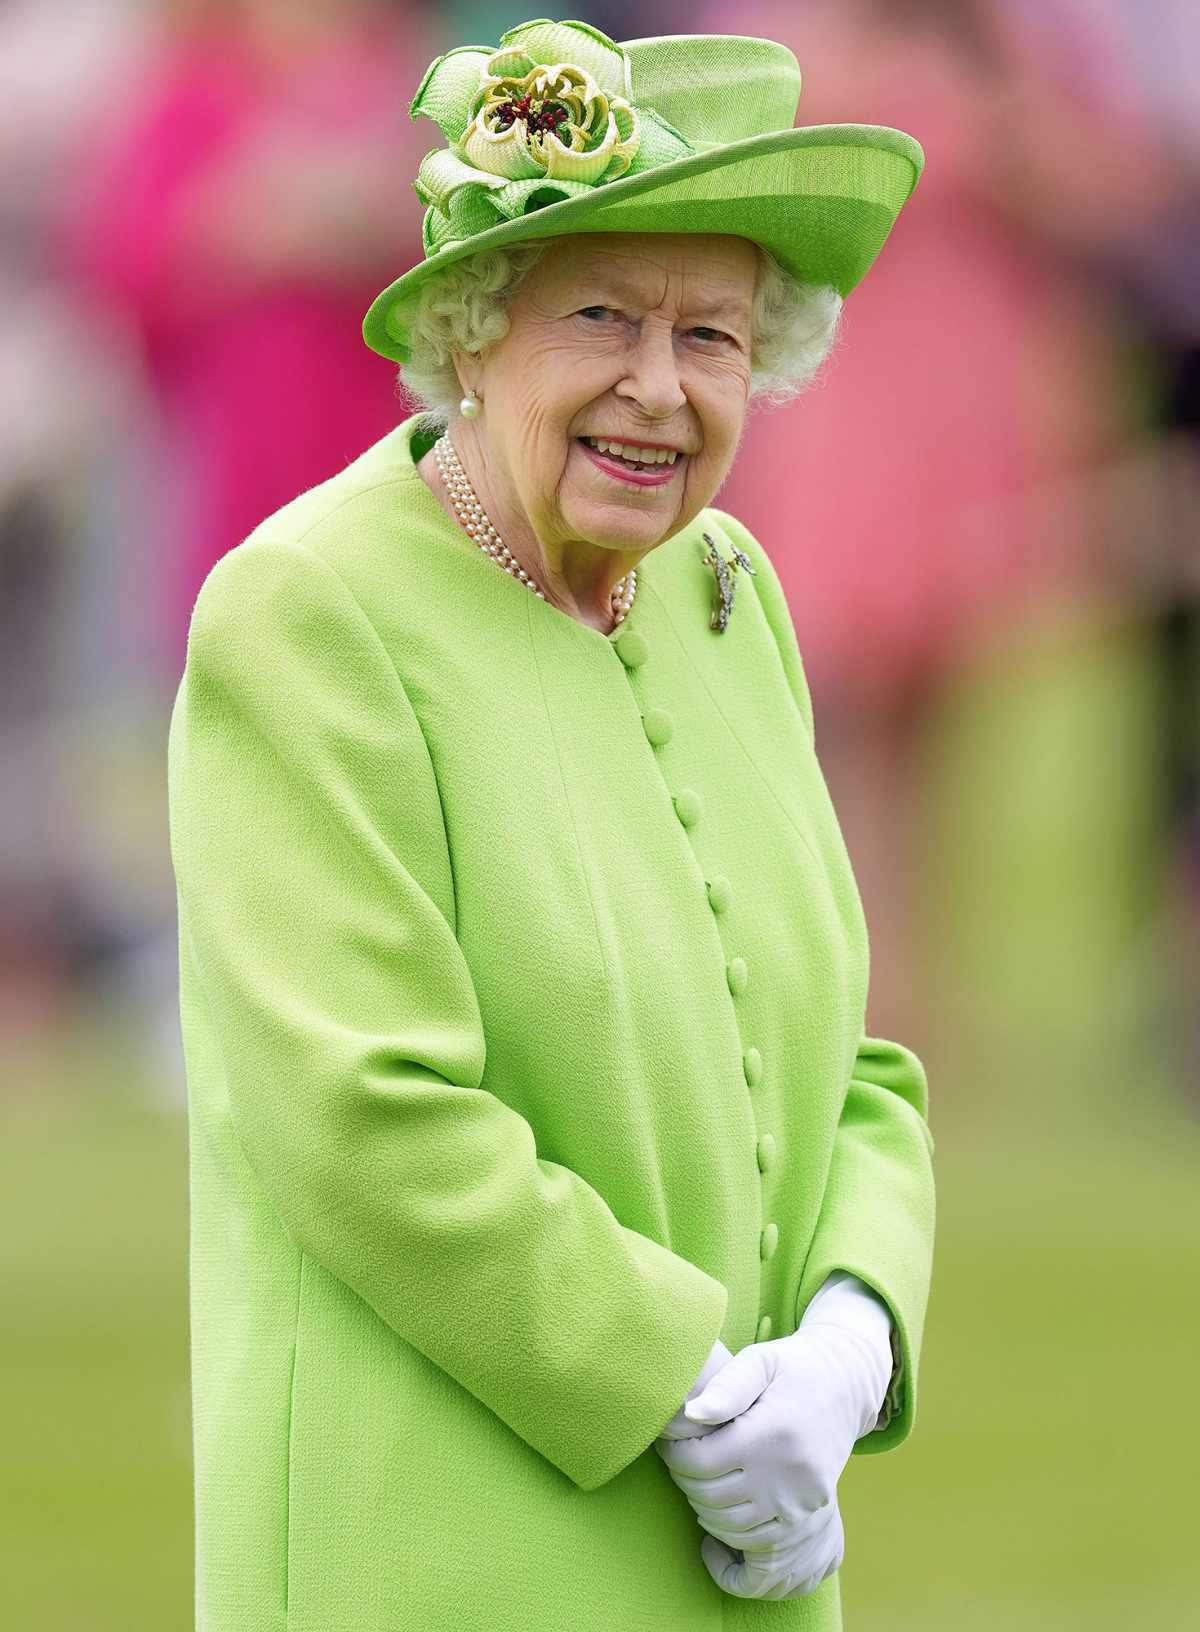 Queen Elizabeth II Dead: NFL Will Hold Moment of Silence